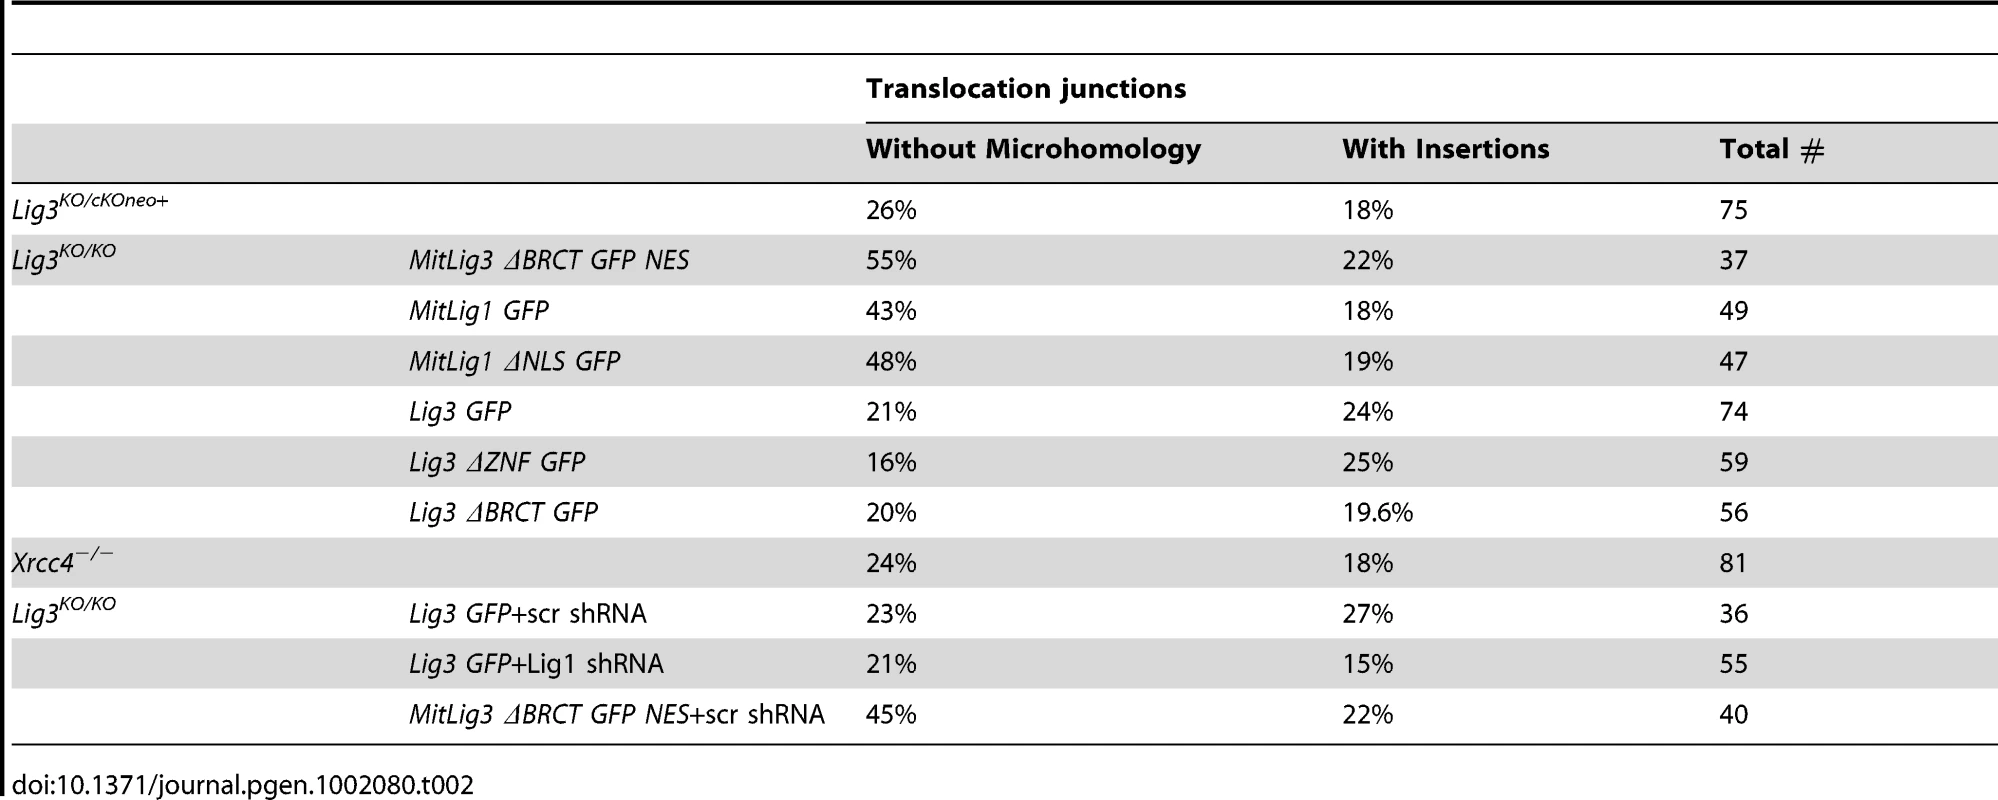 Percent of translocation junctions without microhomology and with insertions.